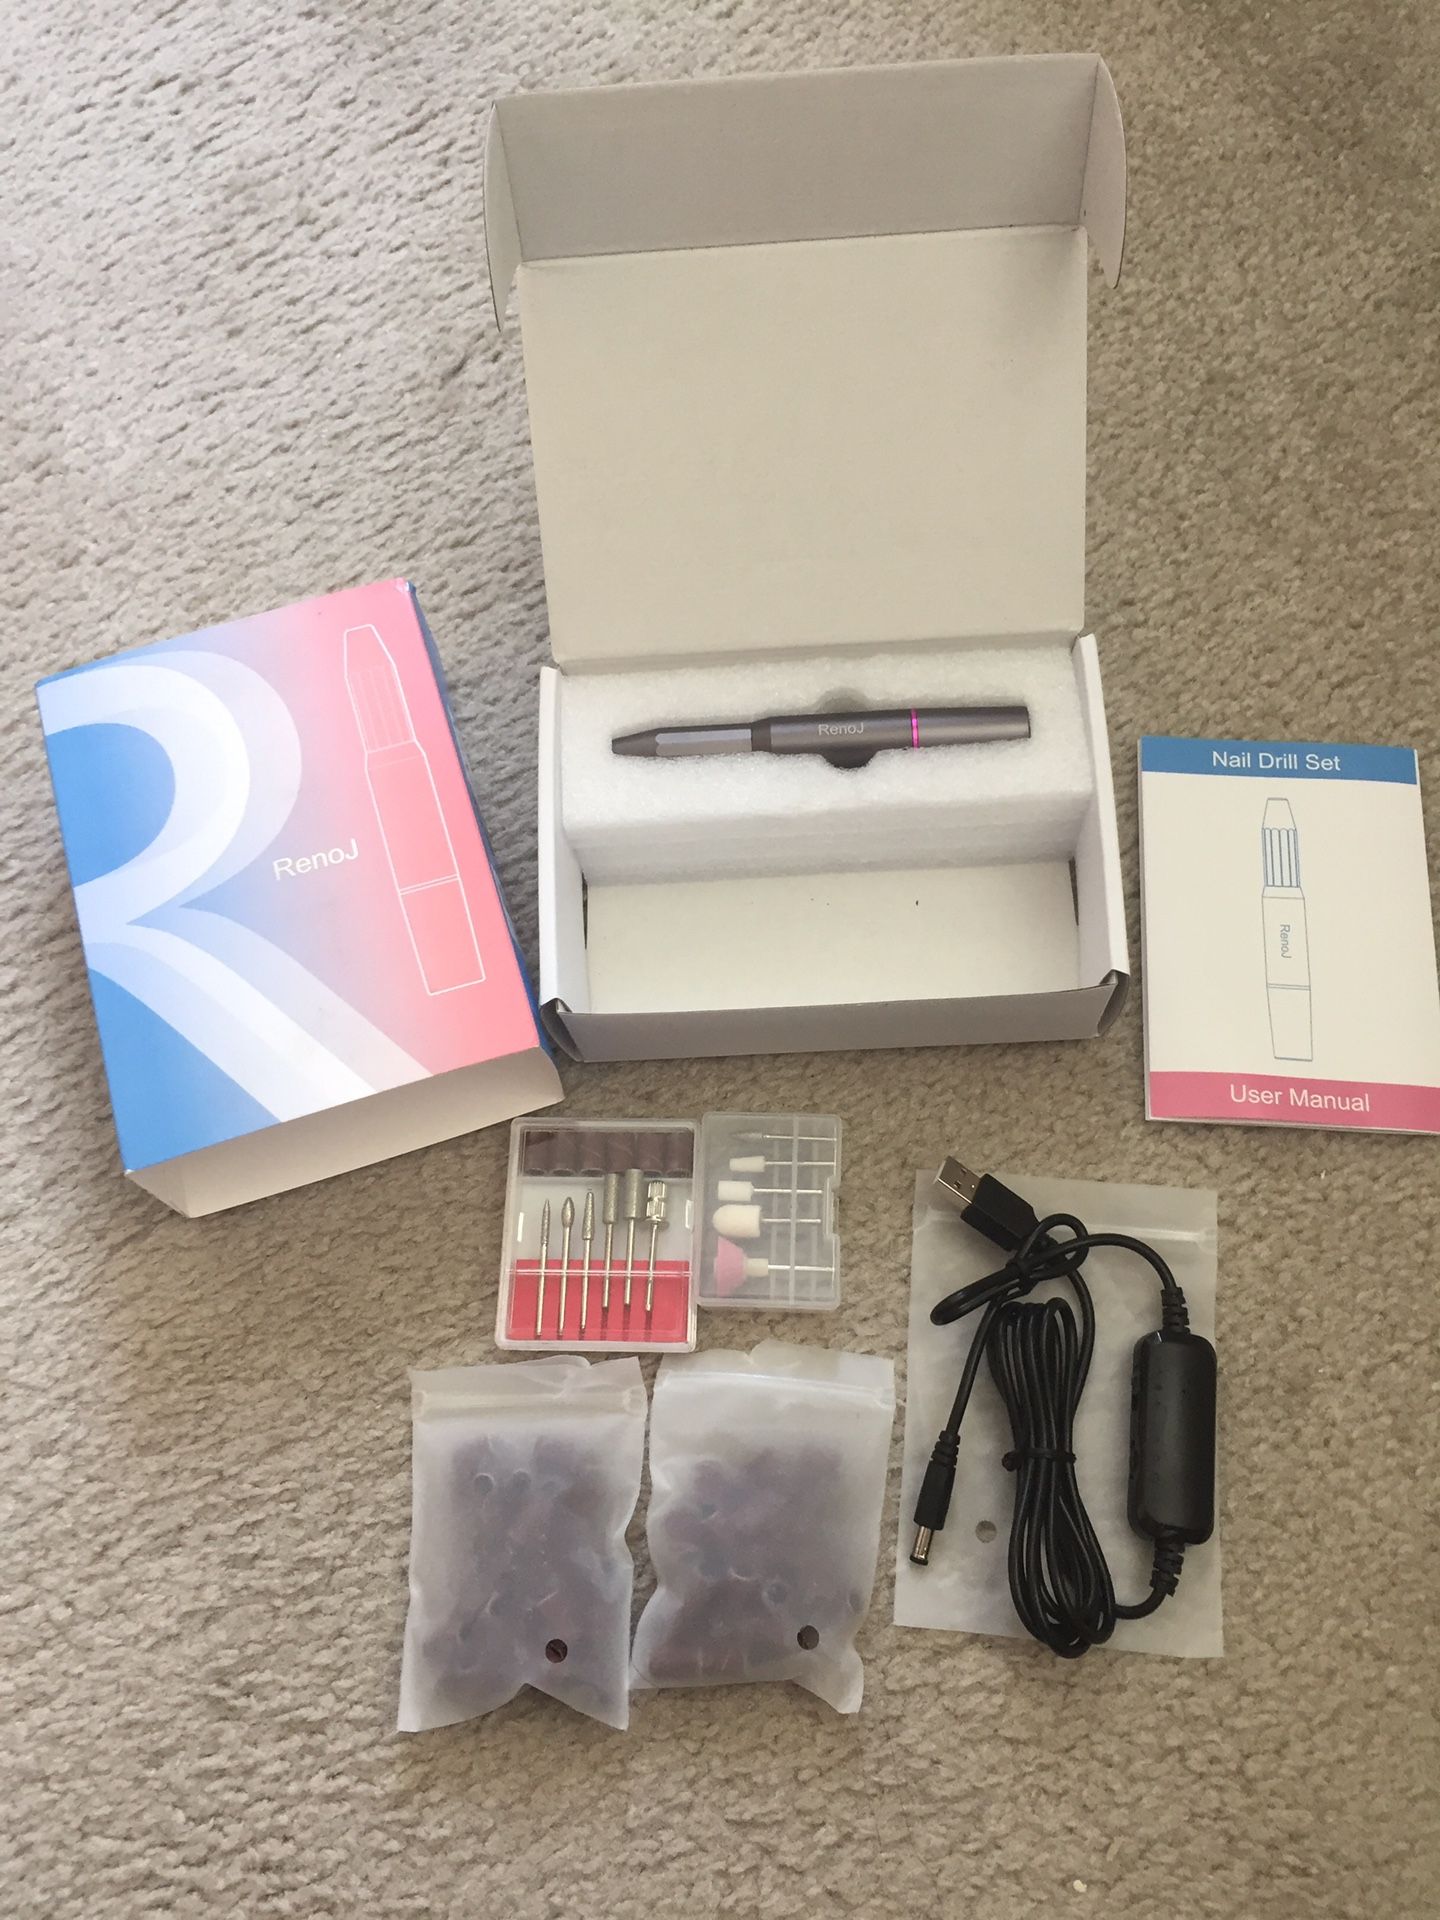 Brand new electric nail file drill never used